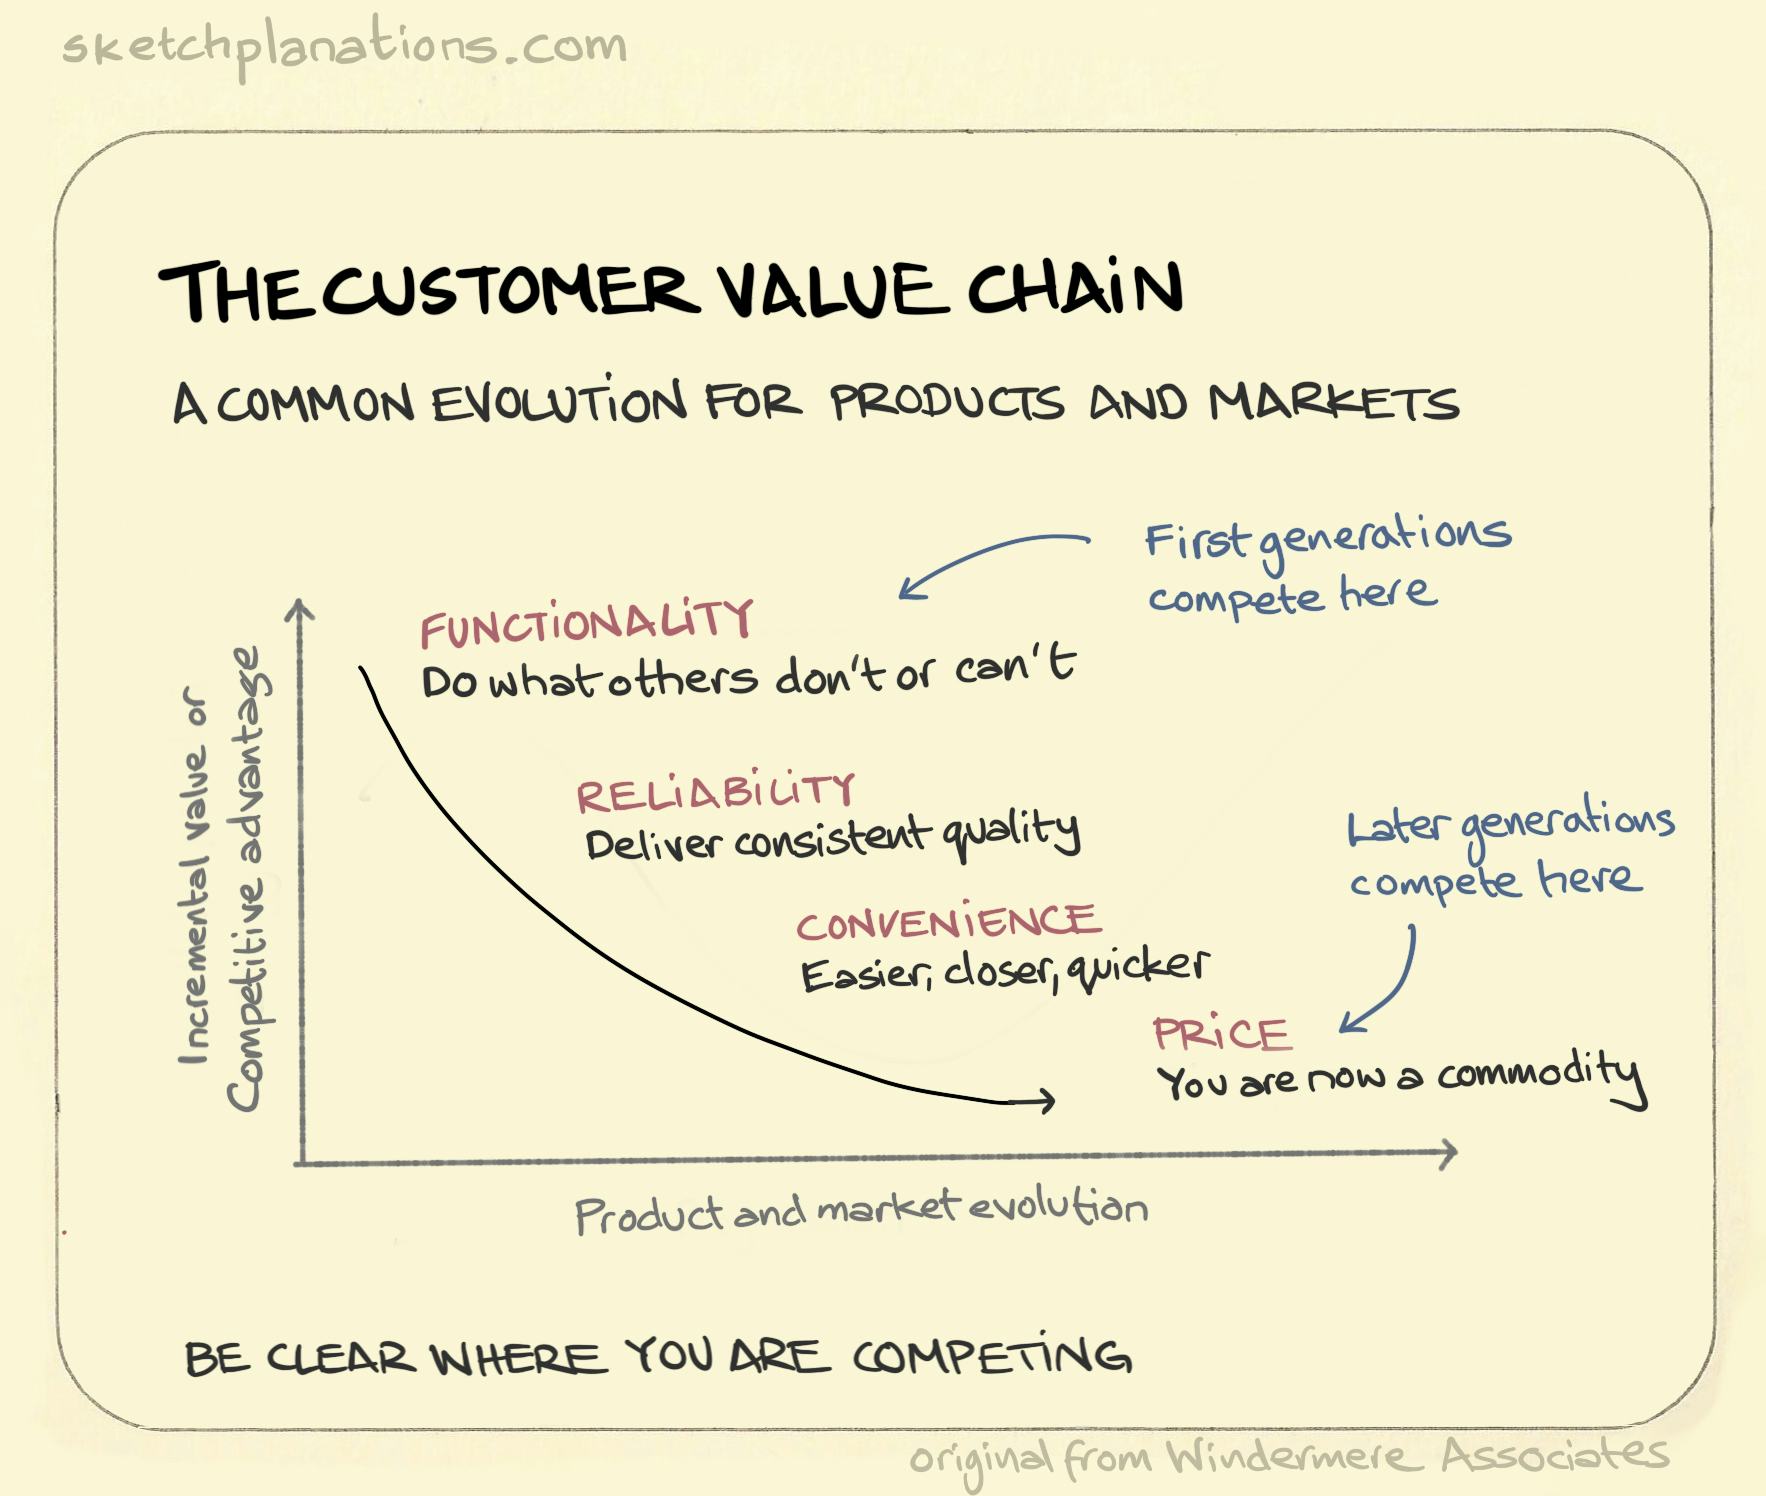 The customer value chain - Sketchplanations